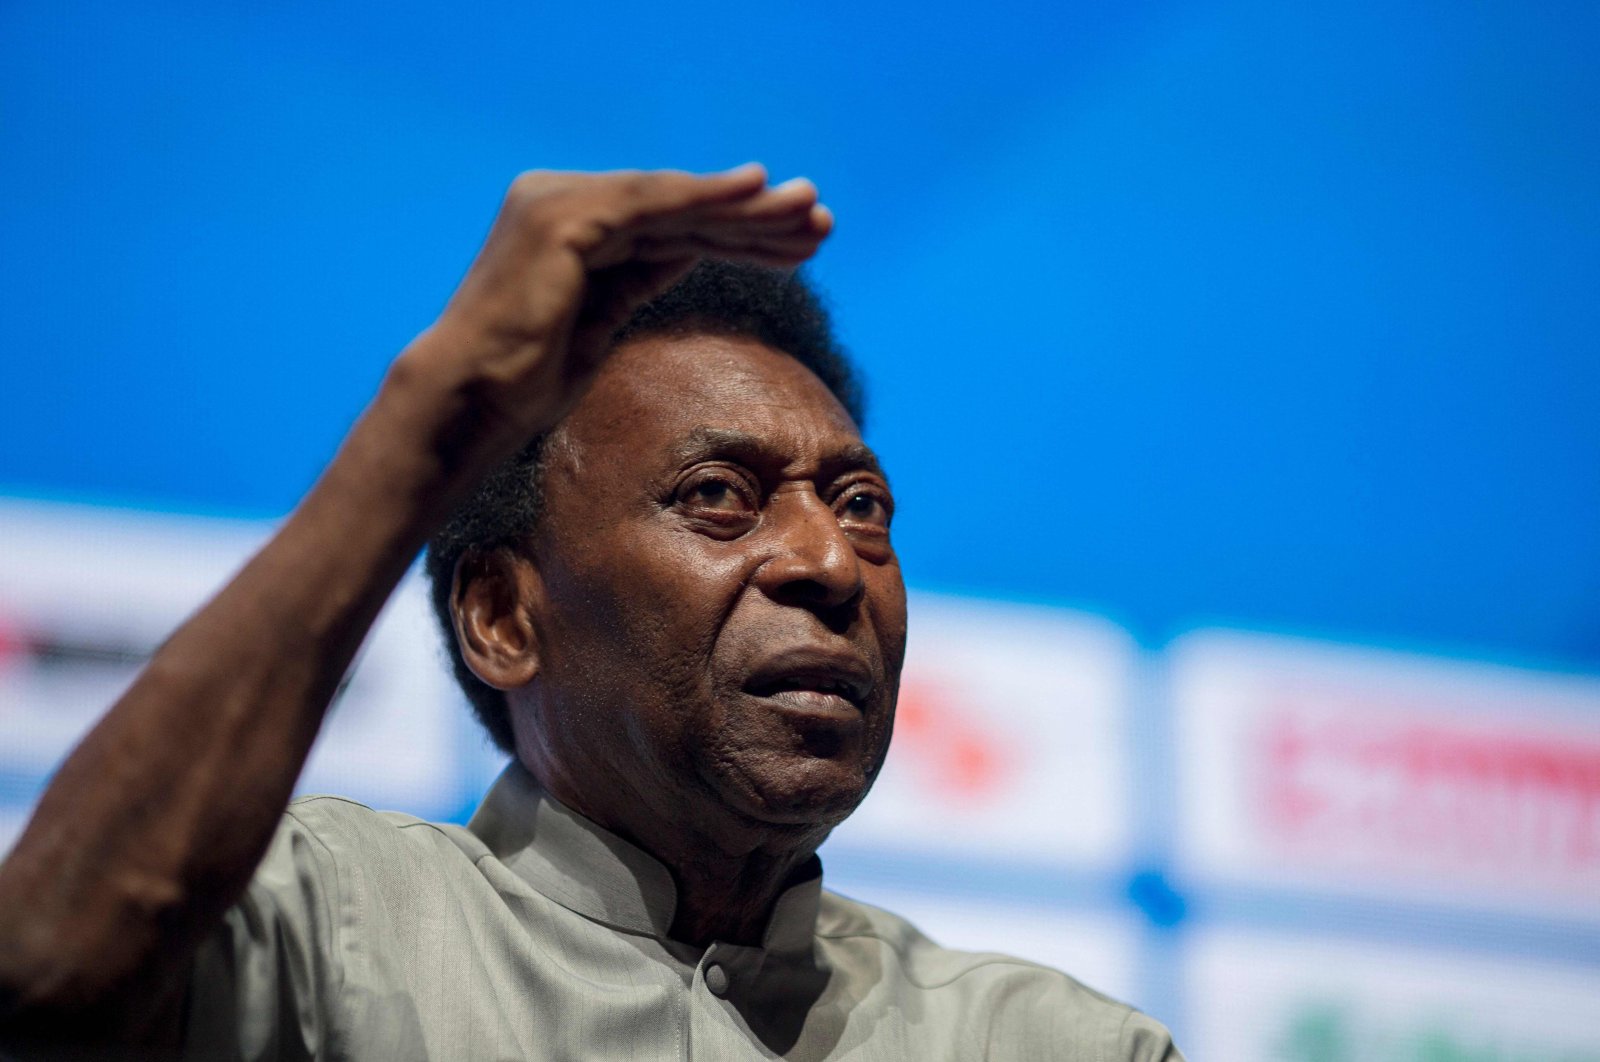 Pele during the opening event of the 2018 Carioca Football Championship, Rio de Janeiro, Brazil, Jan. 15, 2018. (AFP Photo)